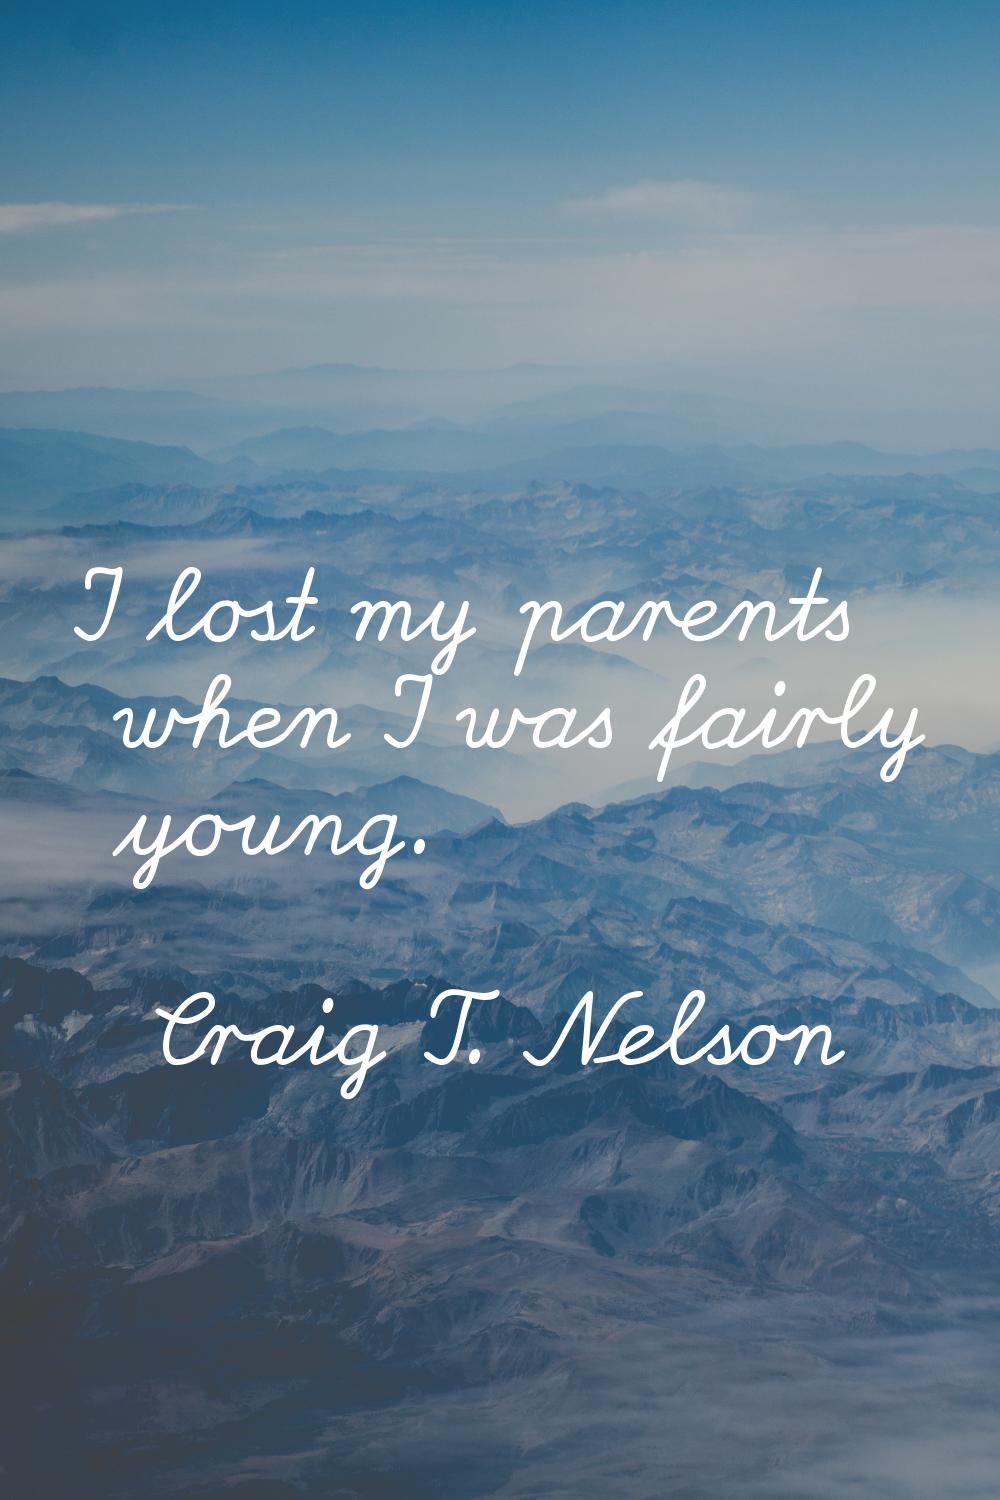 I lost my parents when I was fairly young.